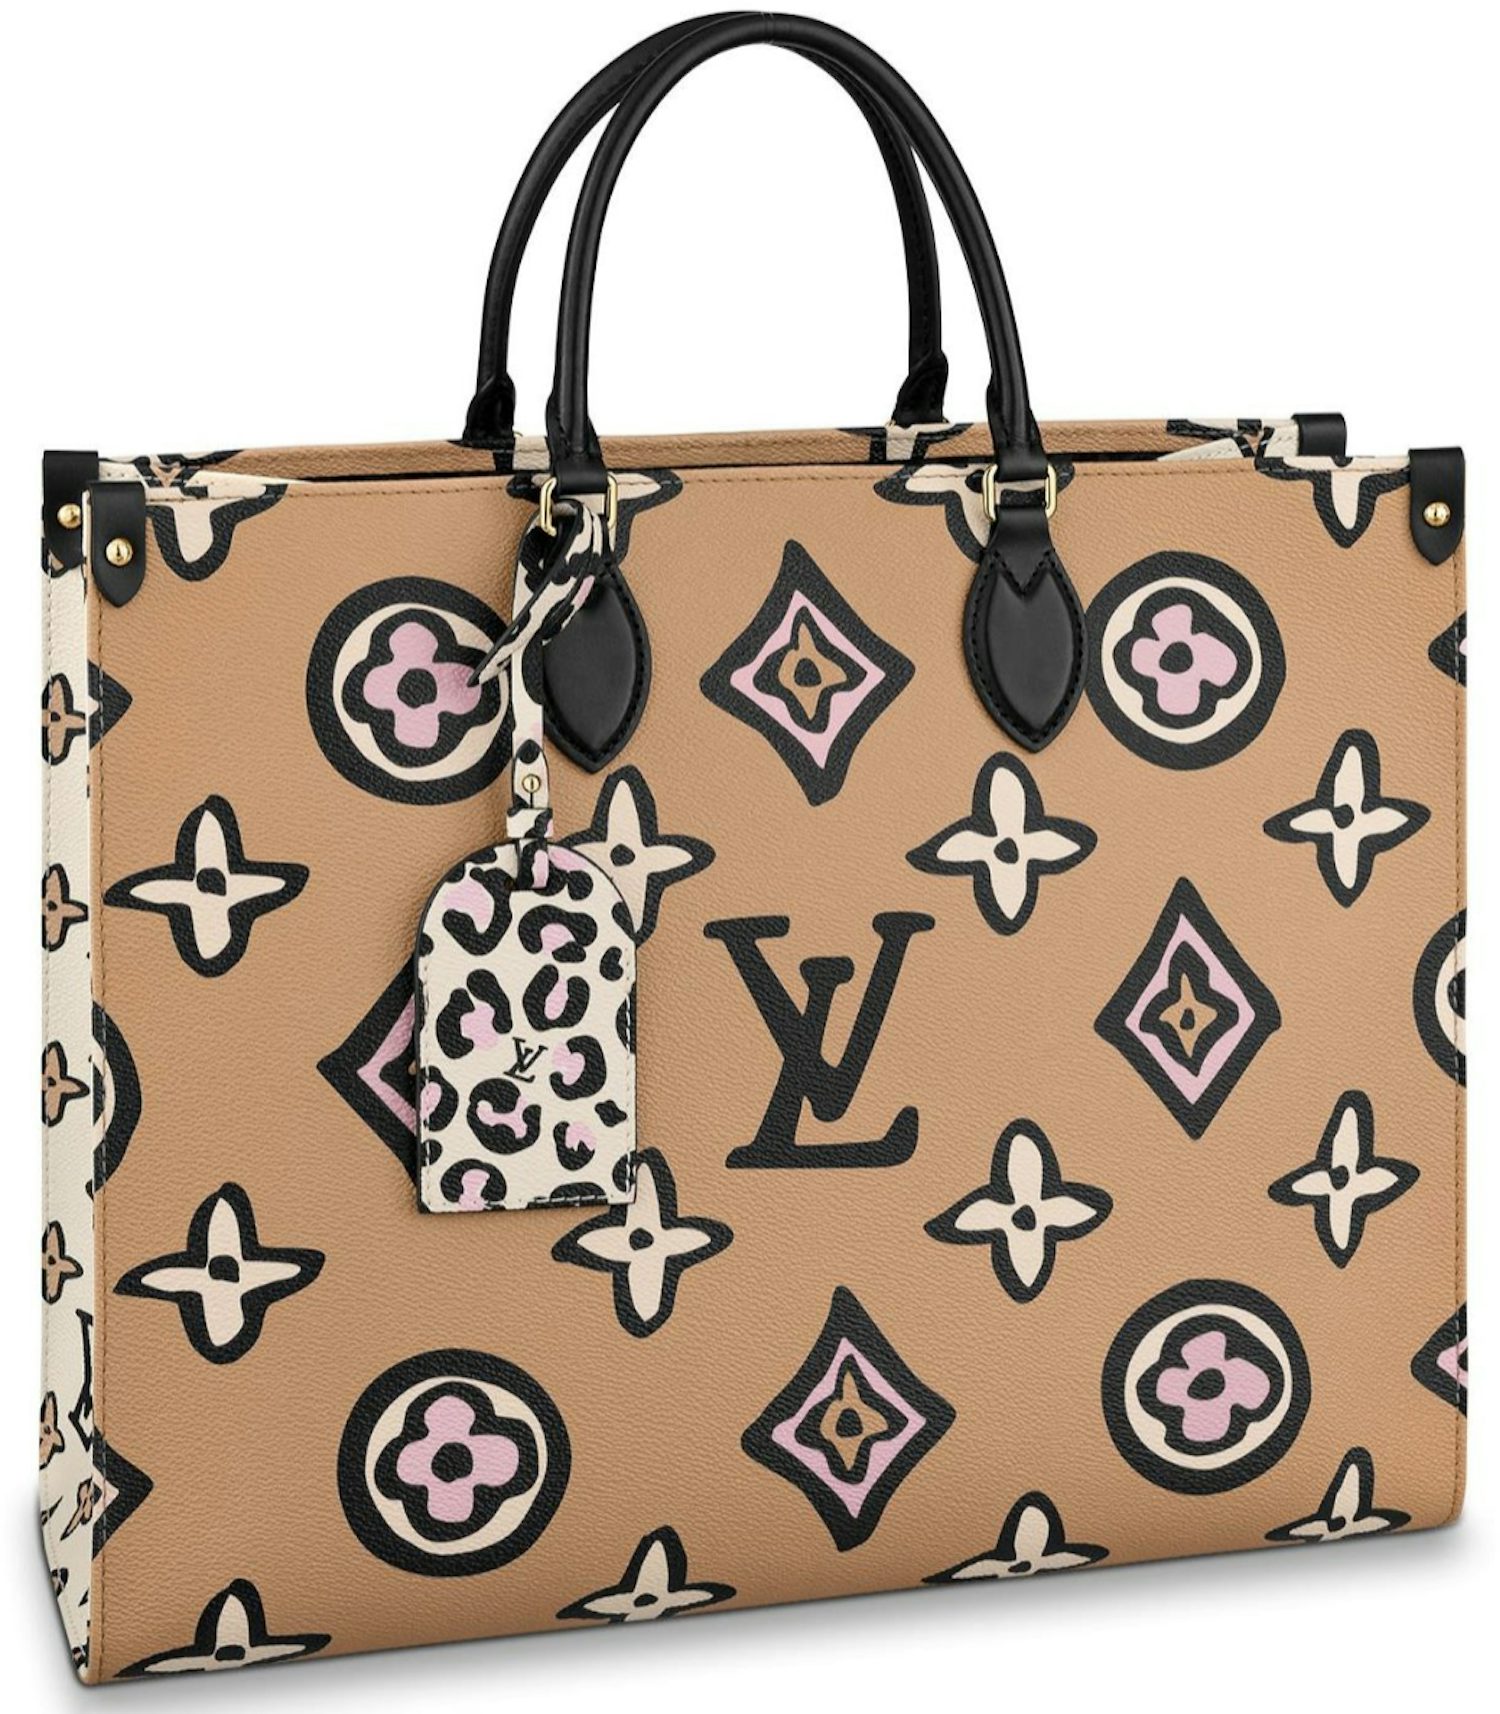 Louis Vuitton Limited Edition Onthego GM Tote Bag